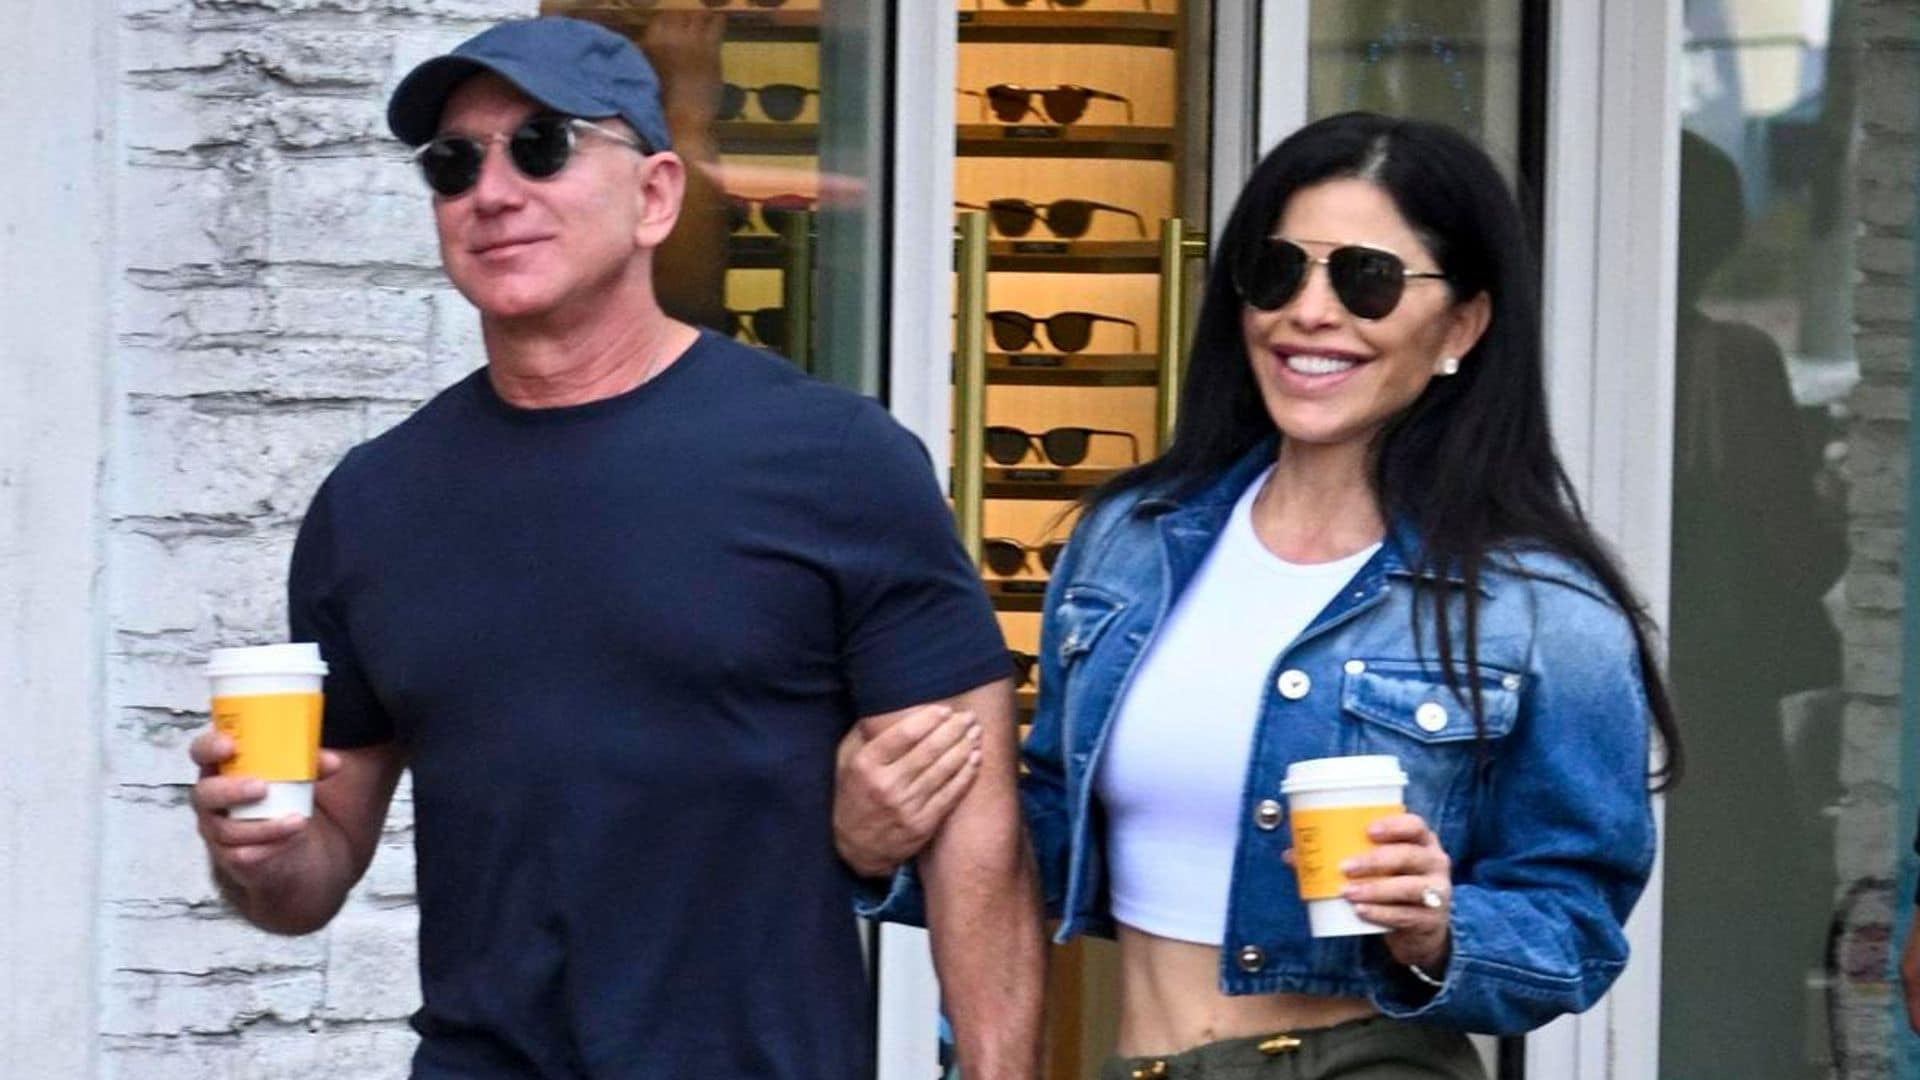 Jeff Bezos and Lauren Sanchez smile and hold on to each other at an art festival in Miami